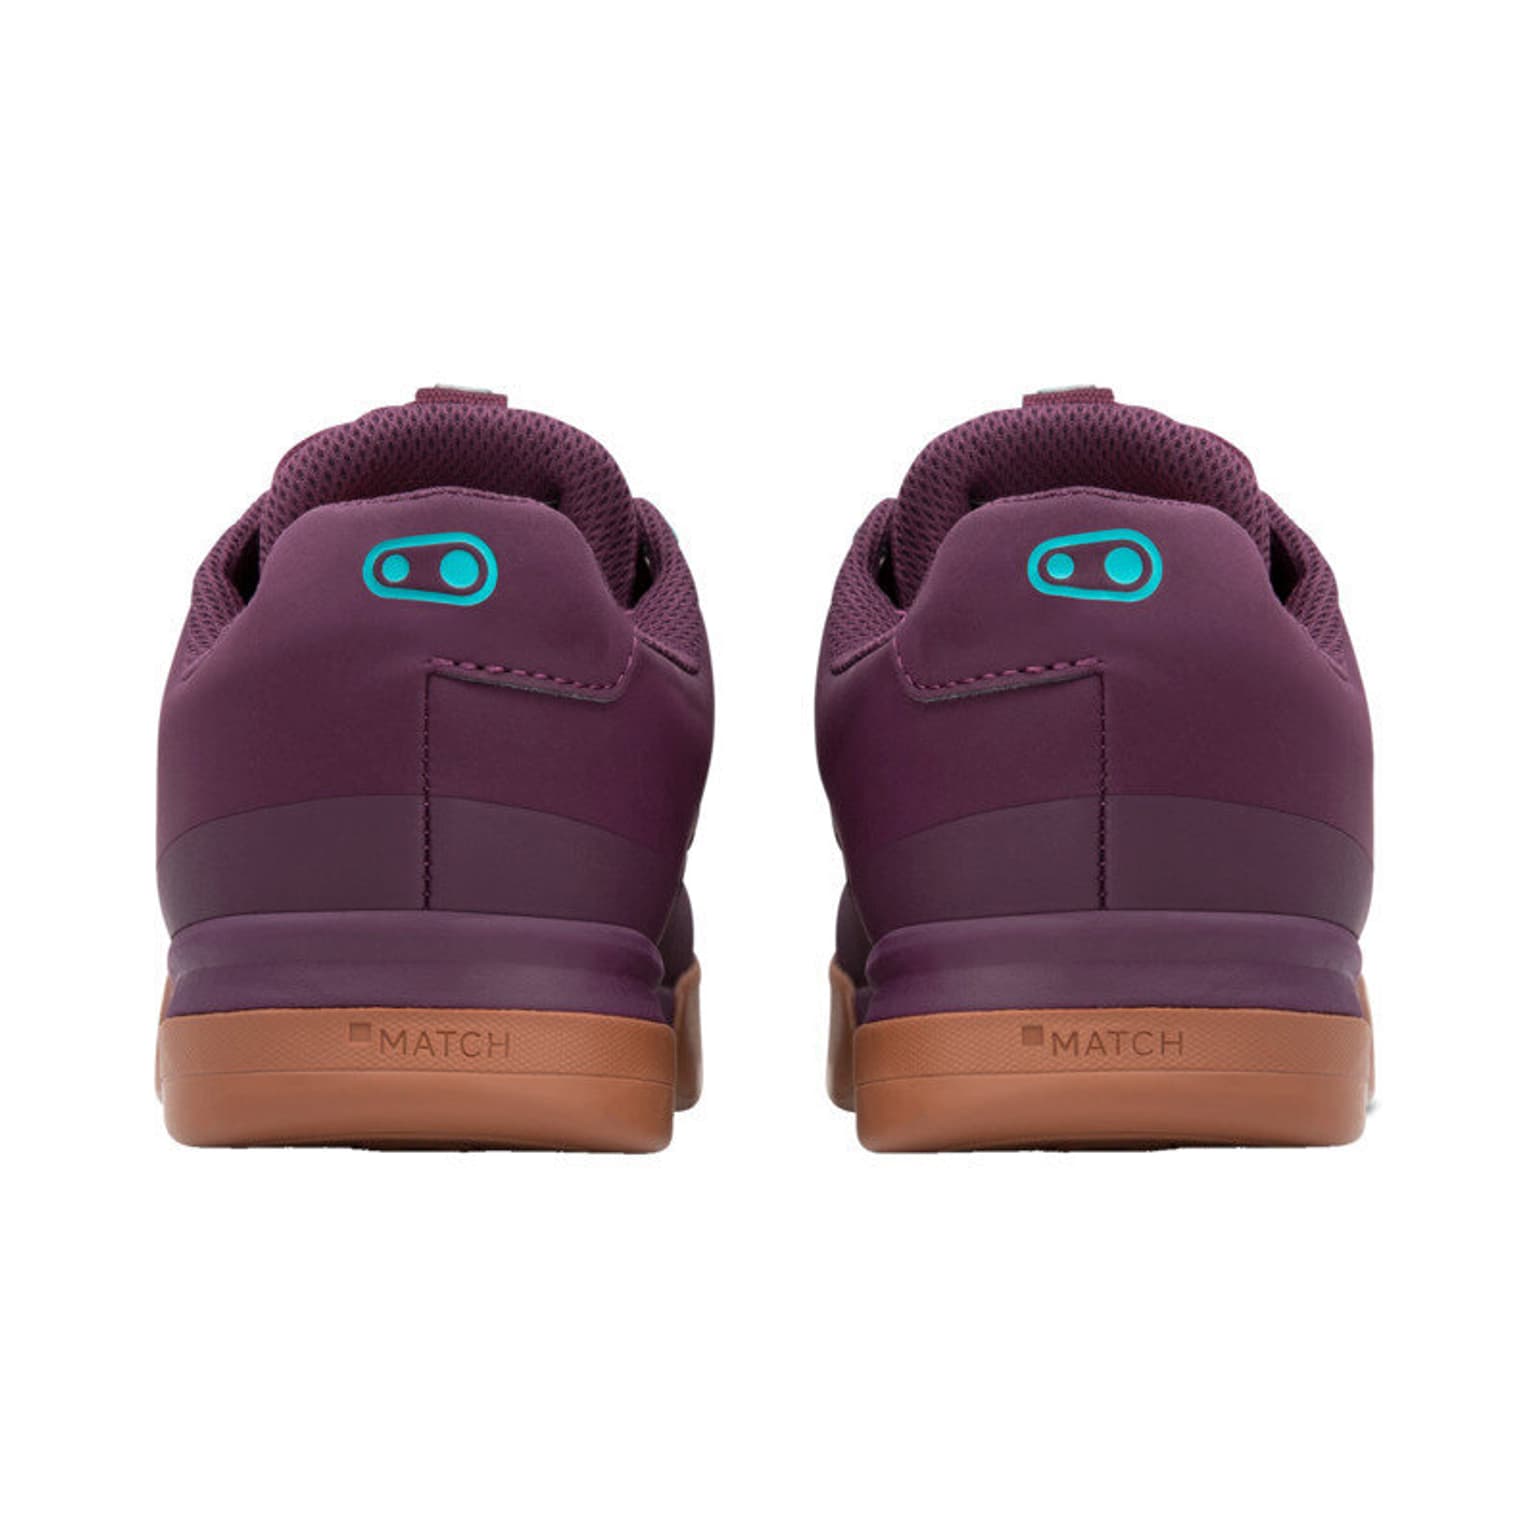 crankbrothers crankbrothers Mallet Lace Chaussures de cyclisme aubergine 3